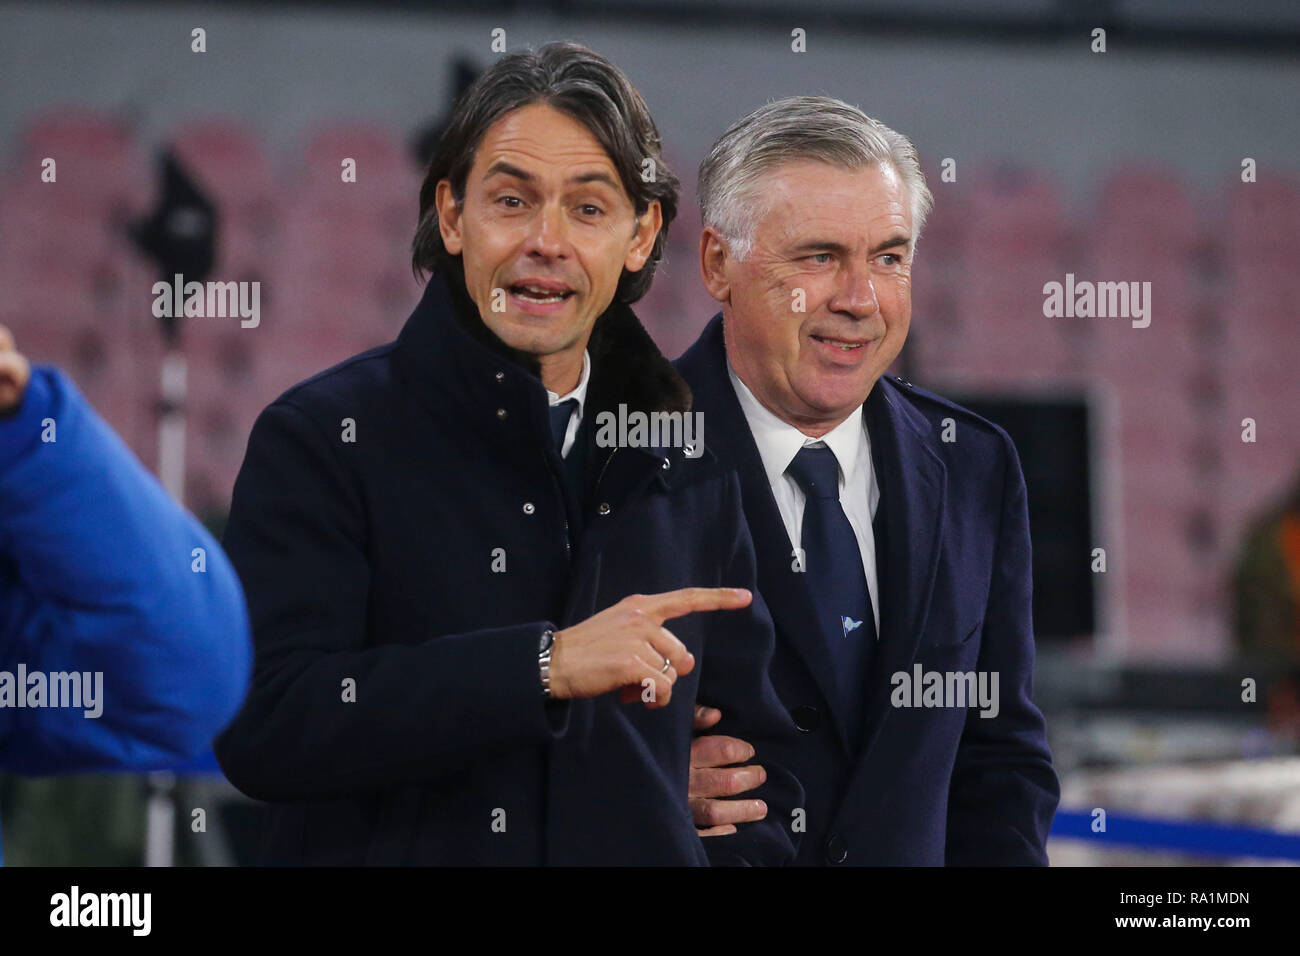 Napoli, Campania, Italy, 29-12-18, Serie A football match SSC Napoli - Bologna at the San Paolo Stadium in picture Filippo Inzaghi (L) coach of the Bo Stock Photo